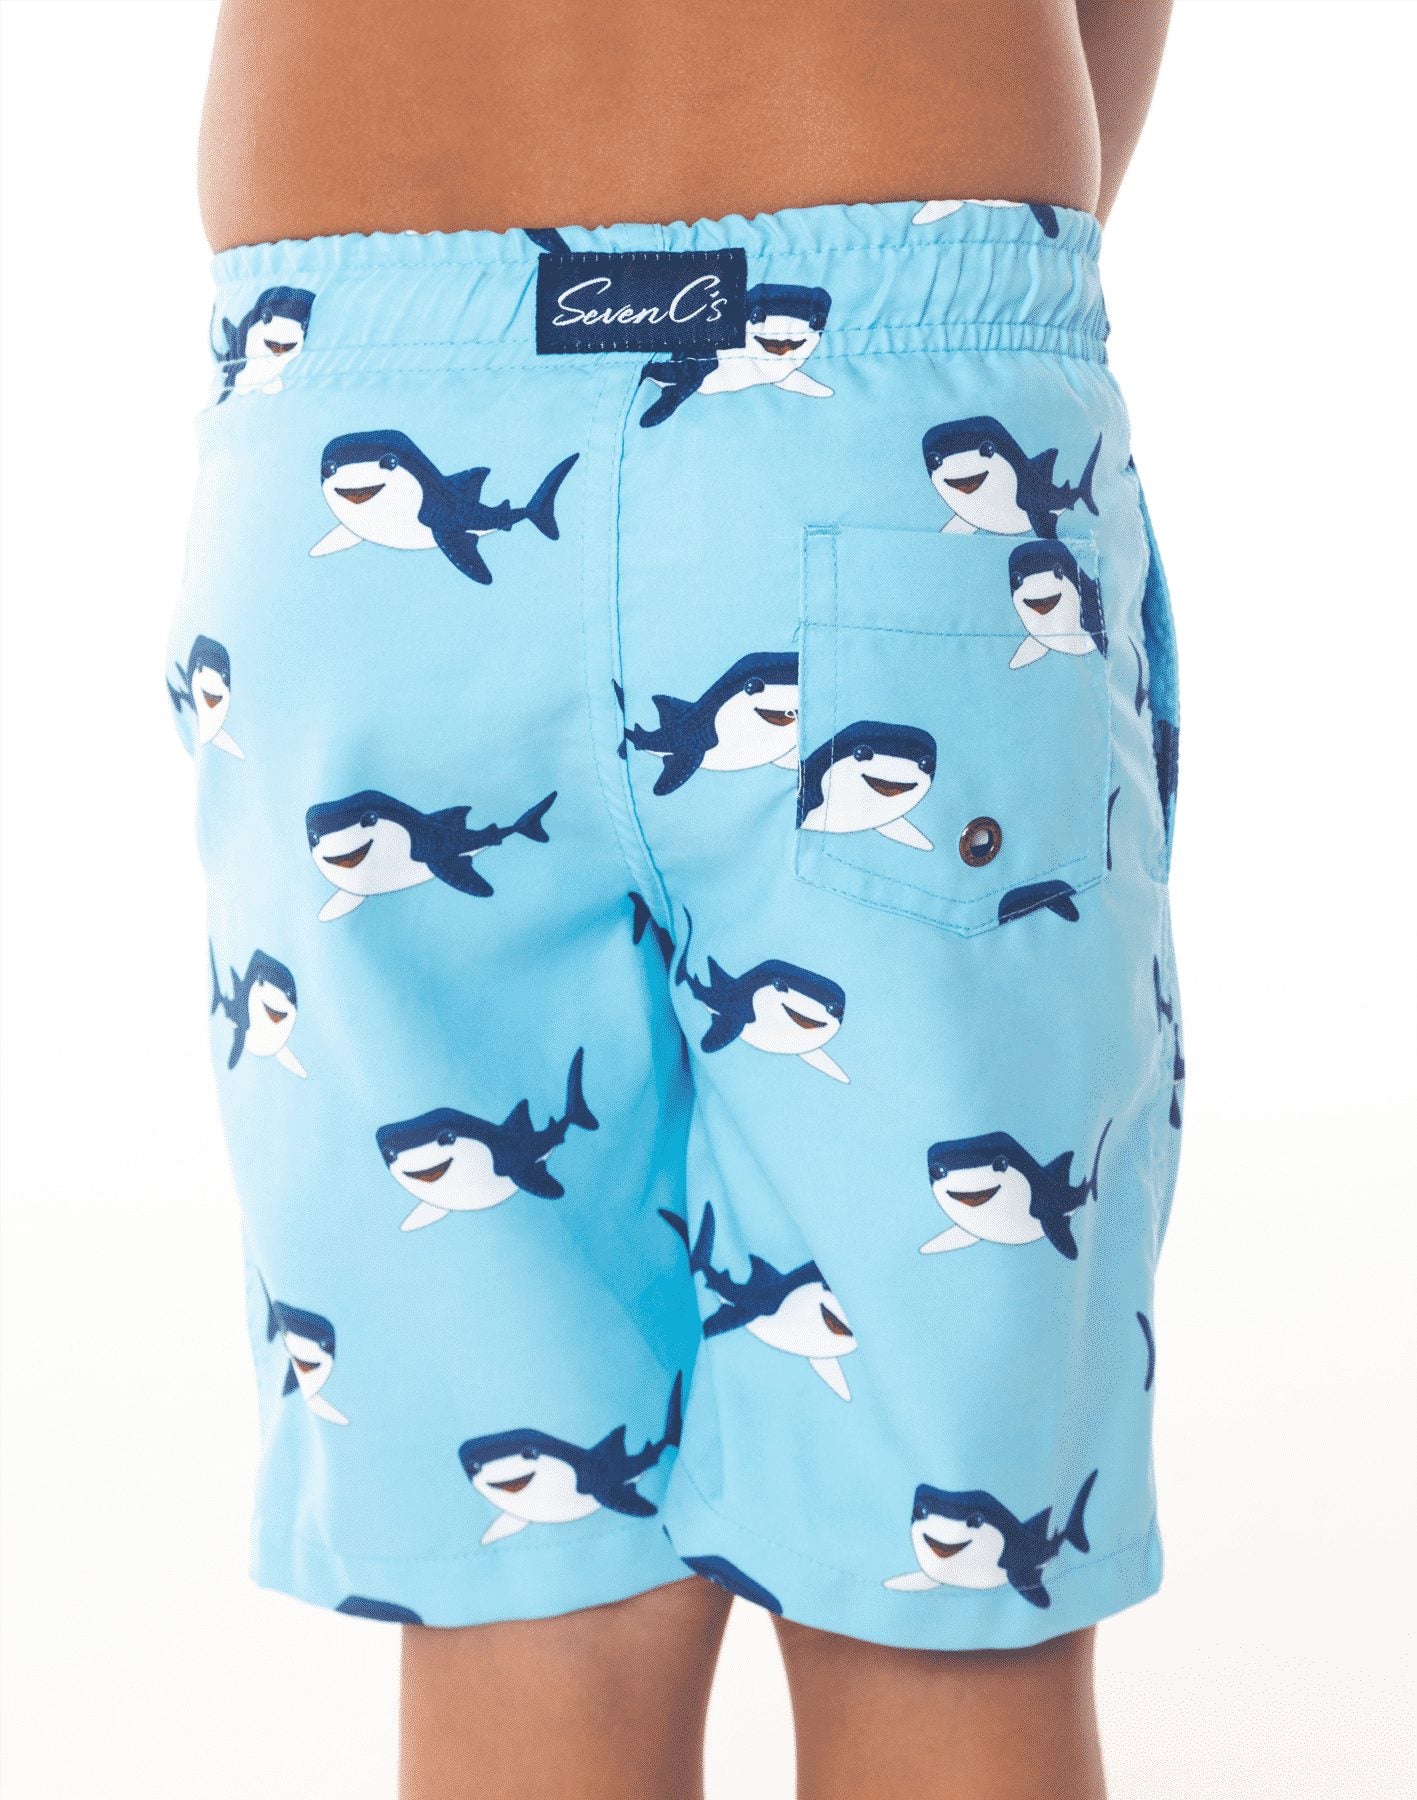 Sustainable Men's Whaleshark Print Shorts from SevenC's - Back View